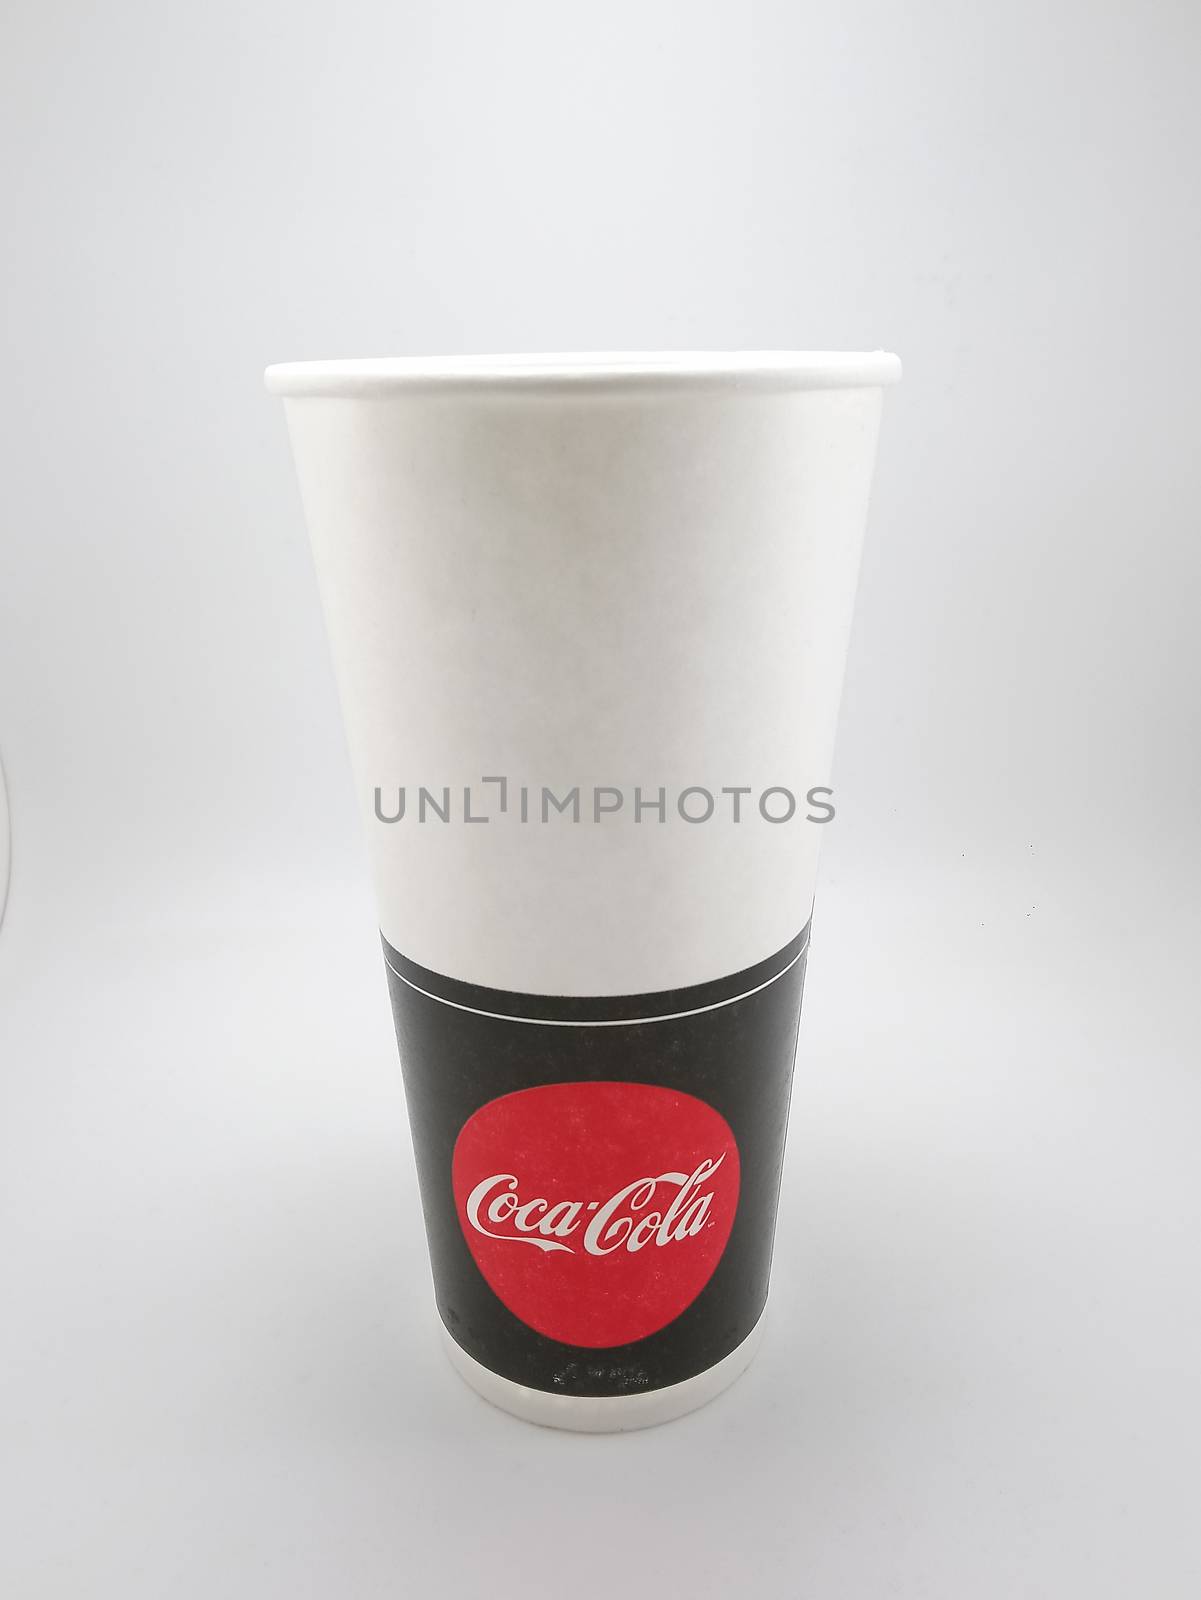 Landers central and coca cola drinking cup in Manila, Philippine by imwaltersy